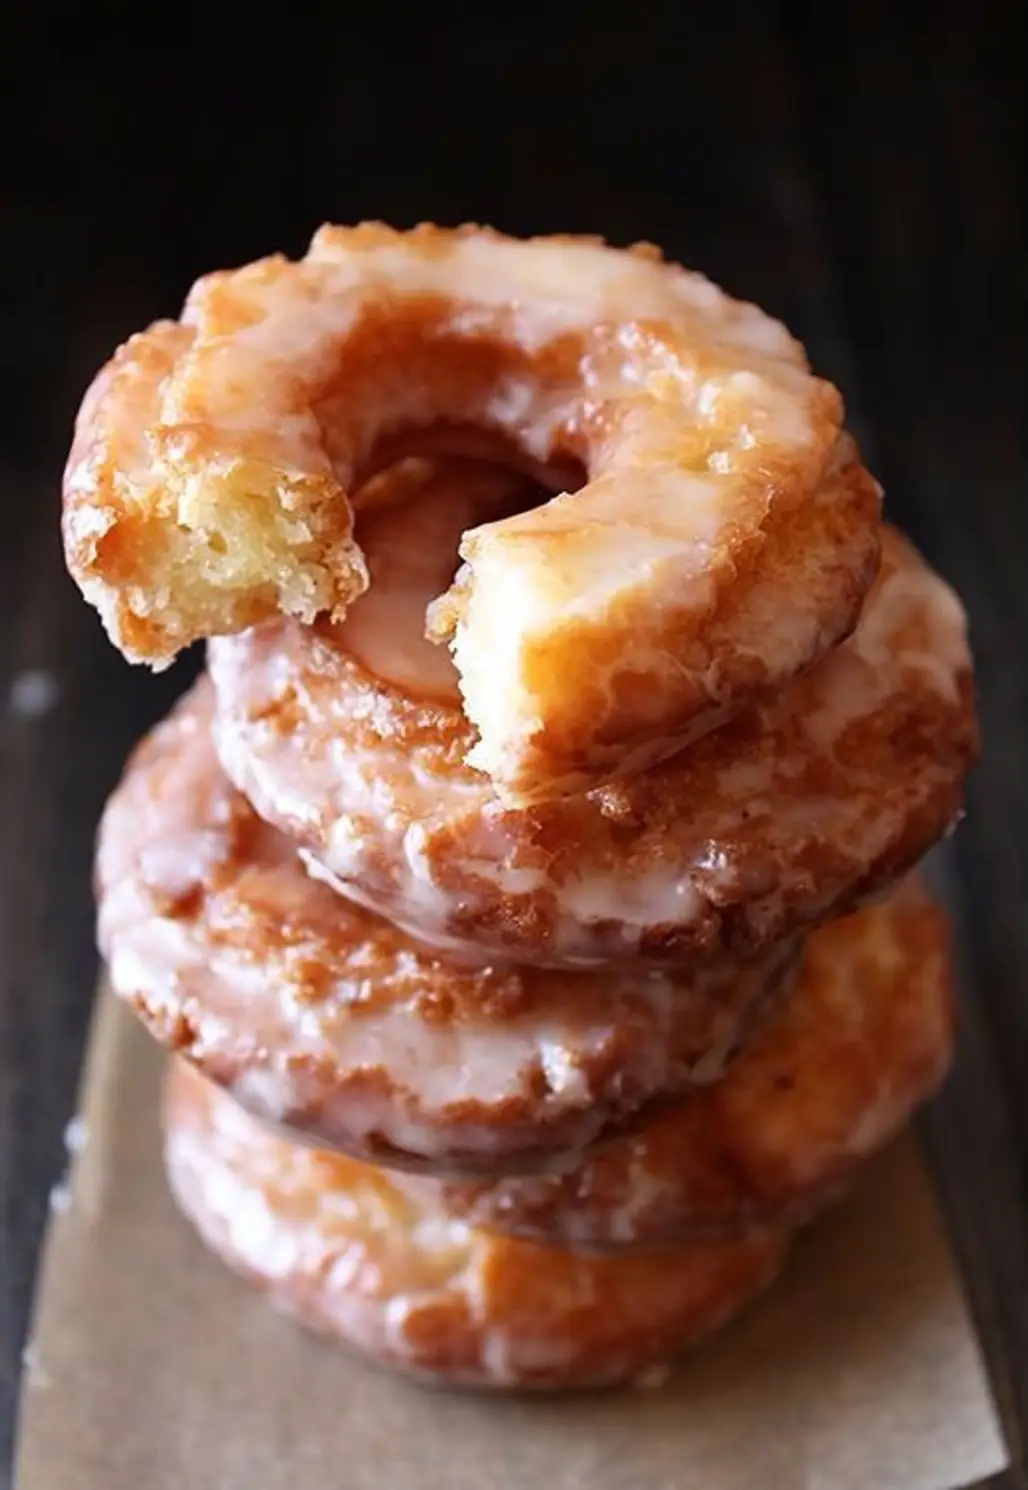 Old Fashioned Donuts